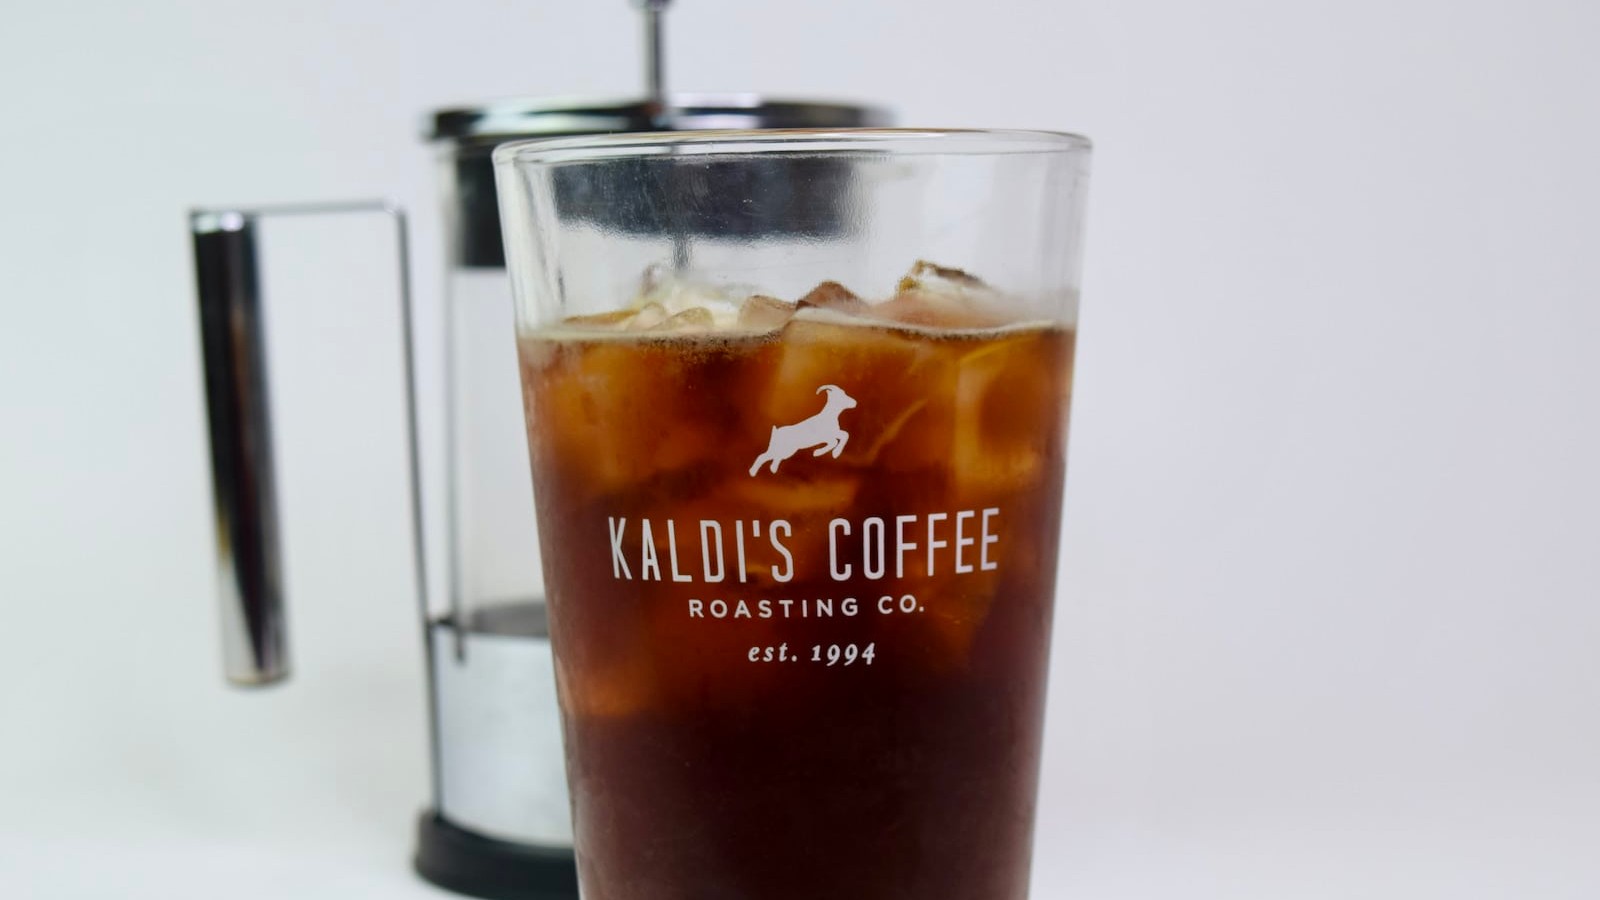 How to Make Cold Brew Coffee with a French Press